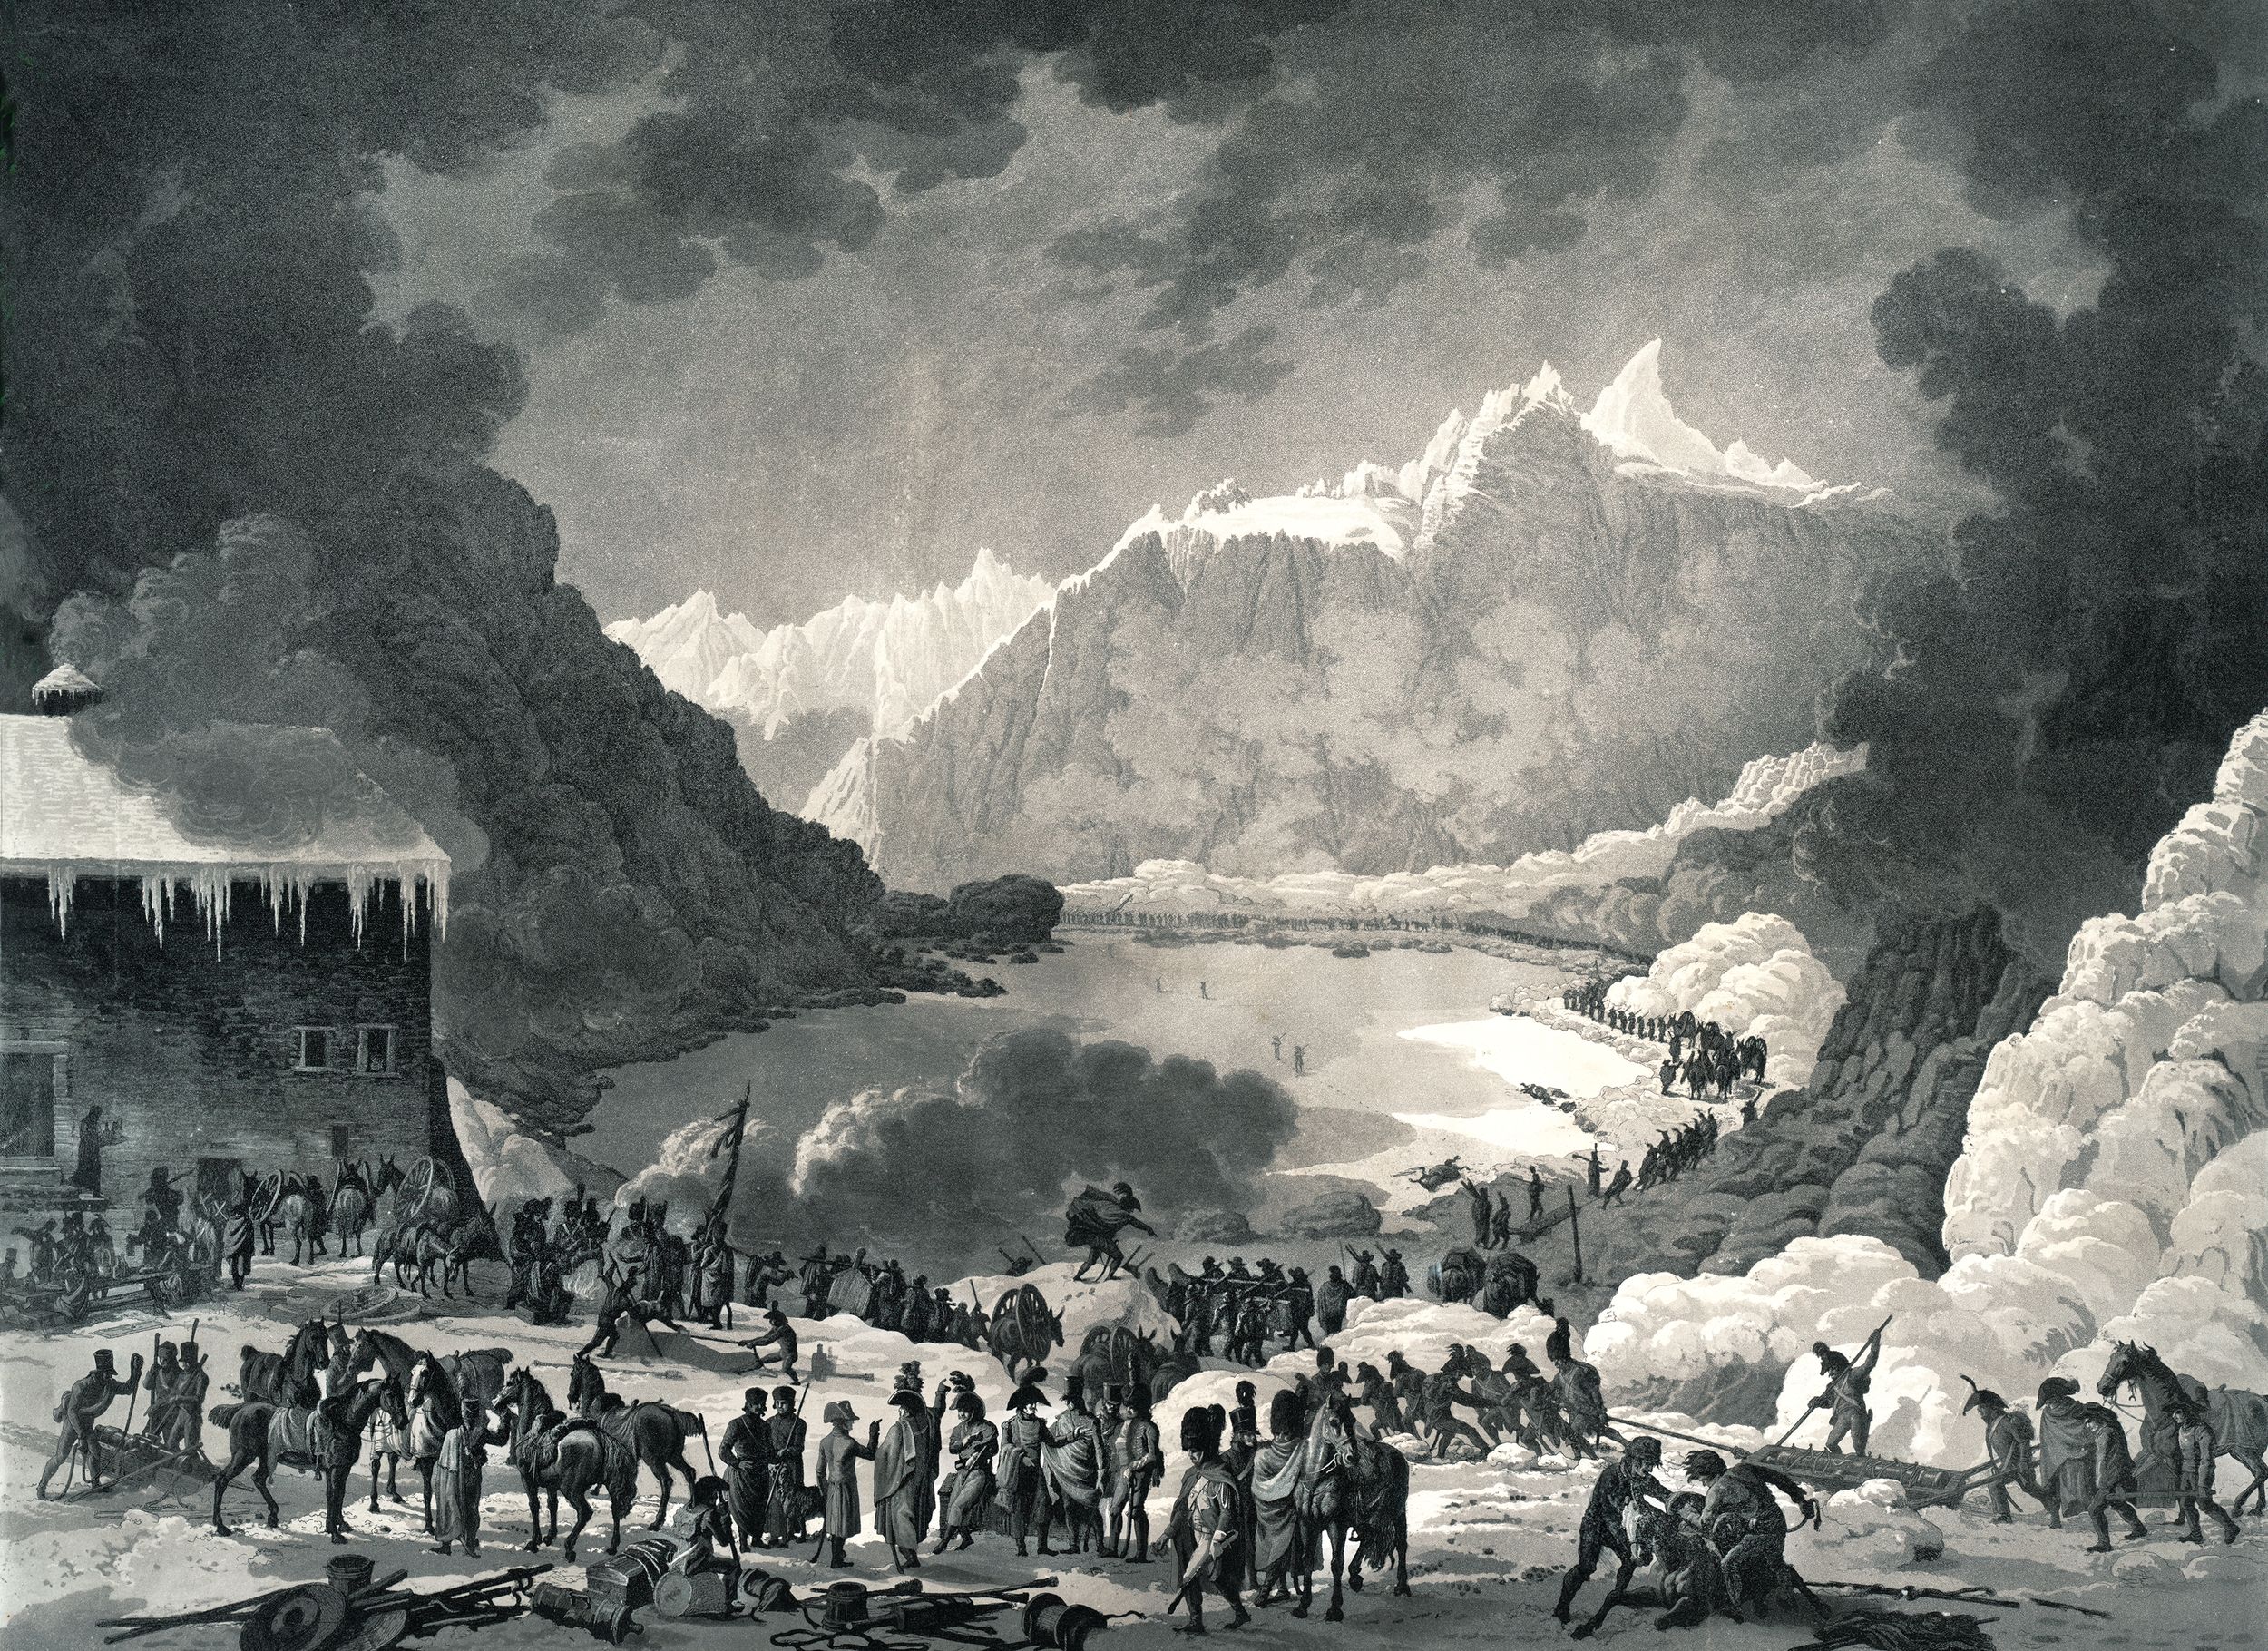 Crossing the Alps in May 1800, Napoleon’s army passes by the Hospice of St. Bernard where monks greeted Napoleon, who had visited them during his first Italian campaign in 1796. Note the dissassembled artillery, with the eight-pounder cannons being dragged in hollowed-out tree trunks in the form of troughs.